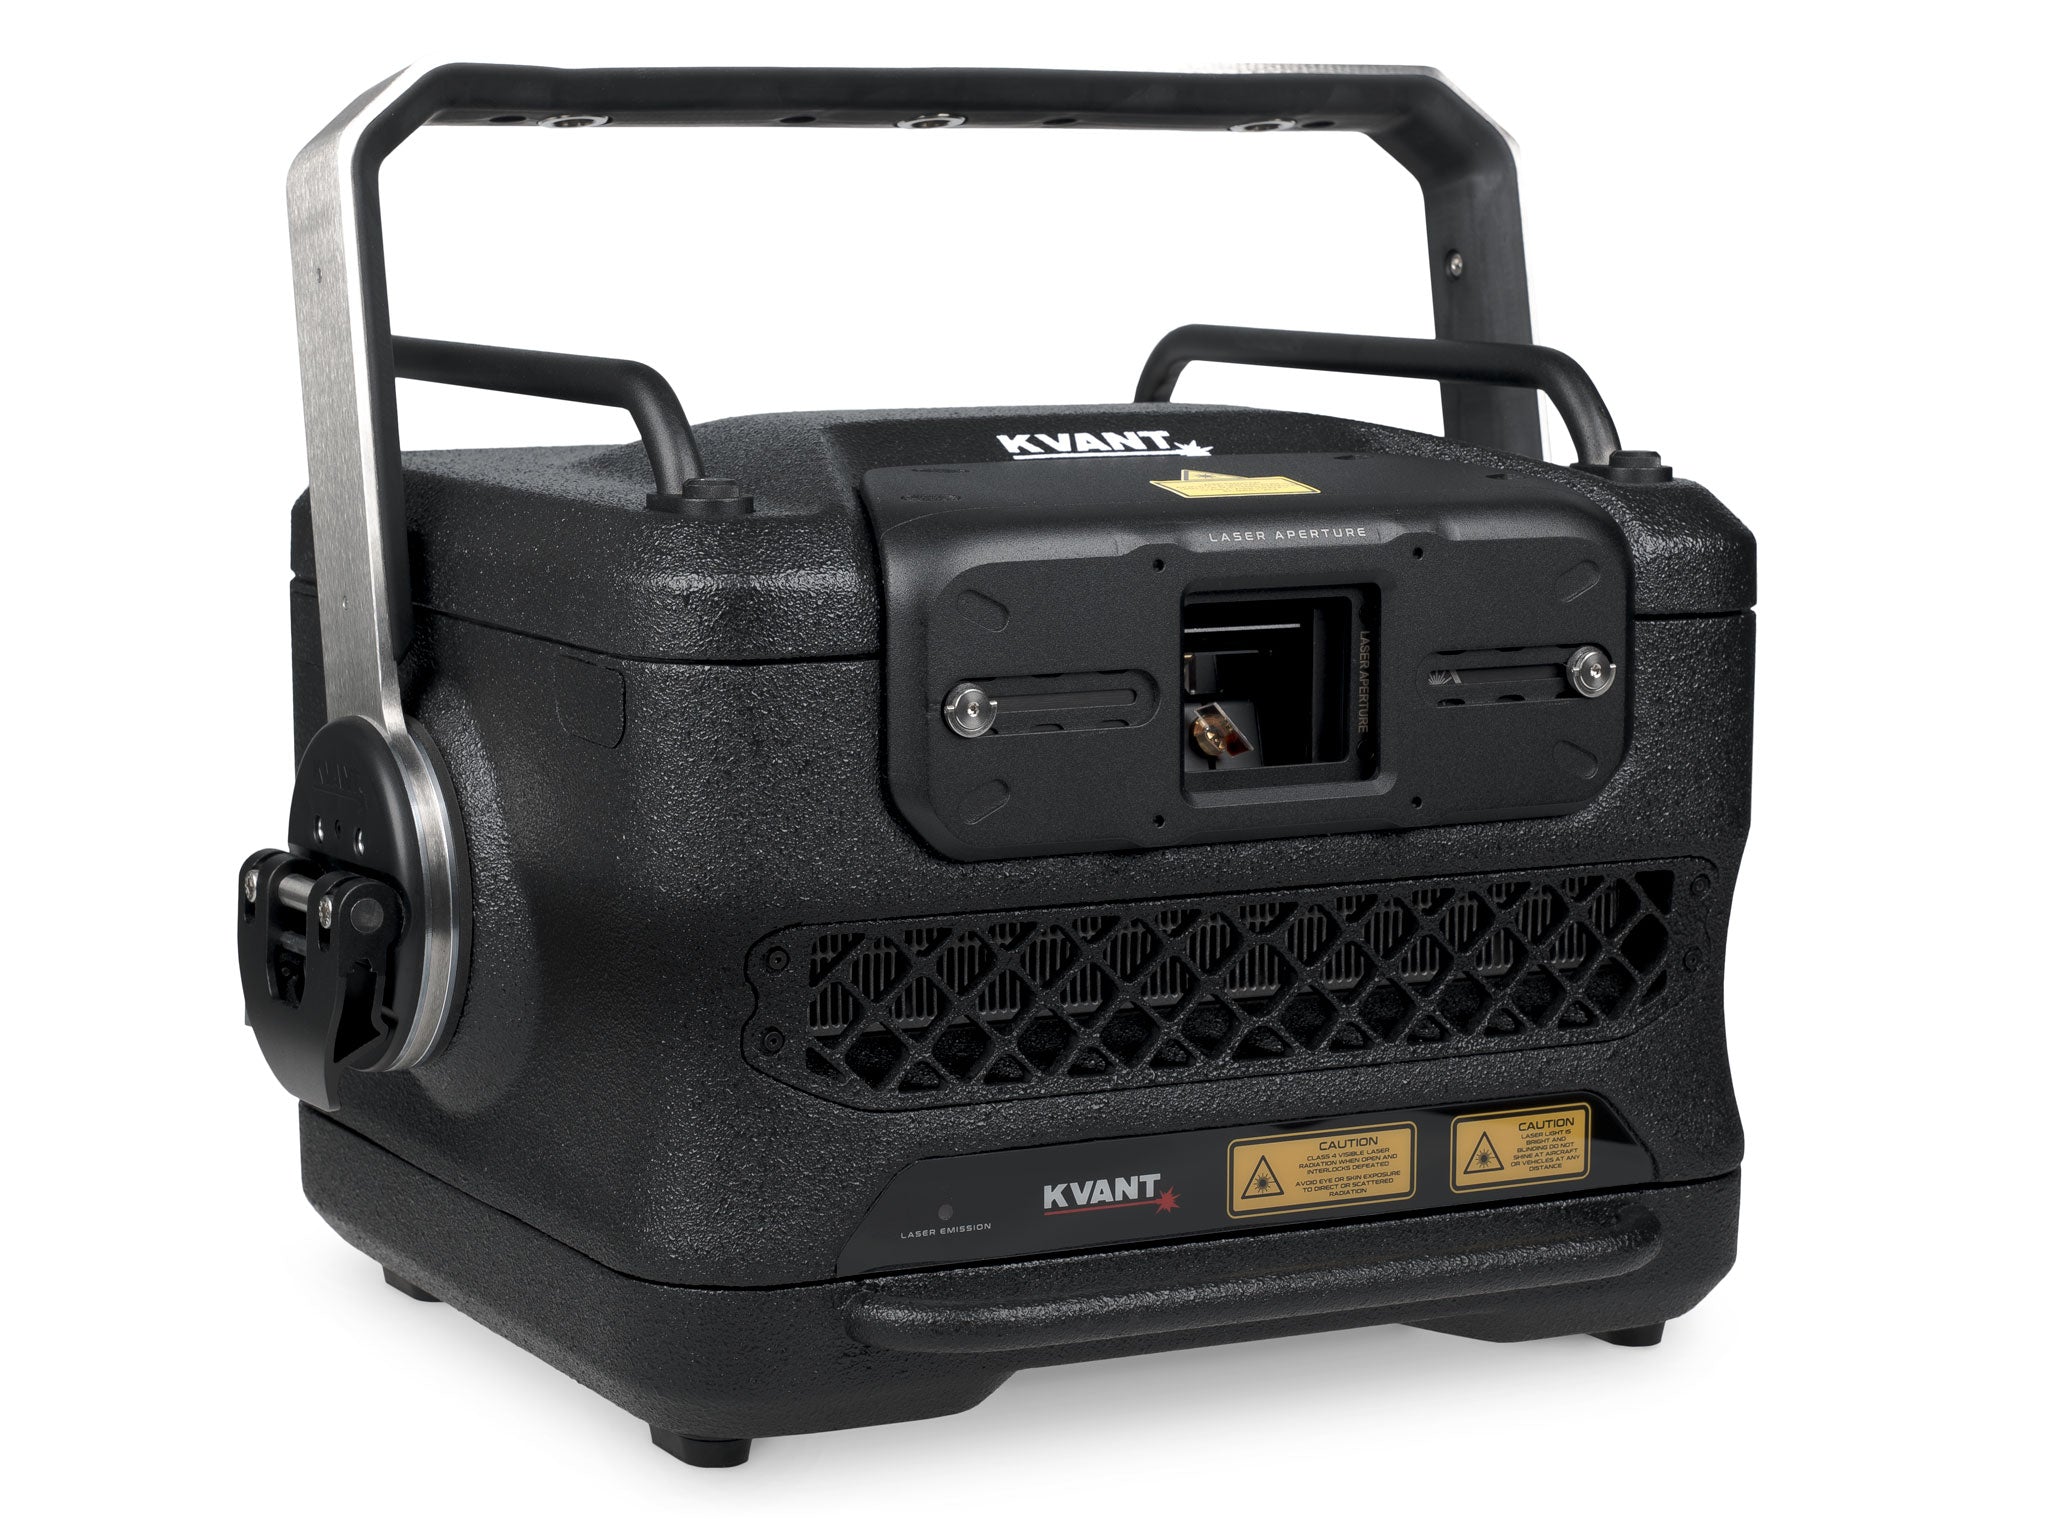 Kvant Lasers - Atom 42 touring professional laser display projector_1